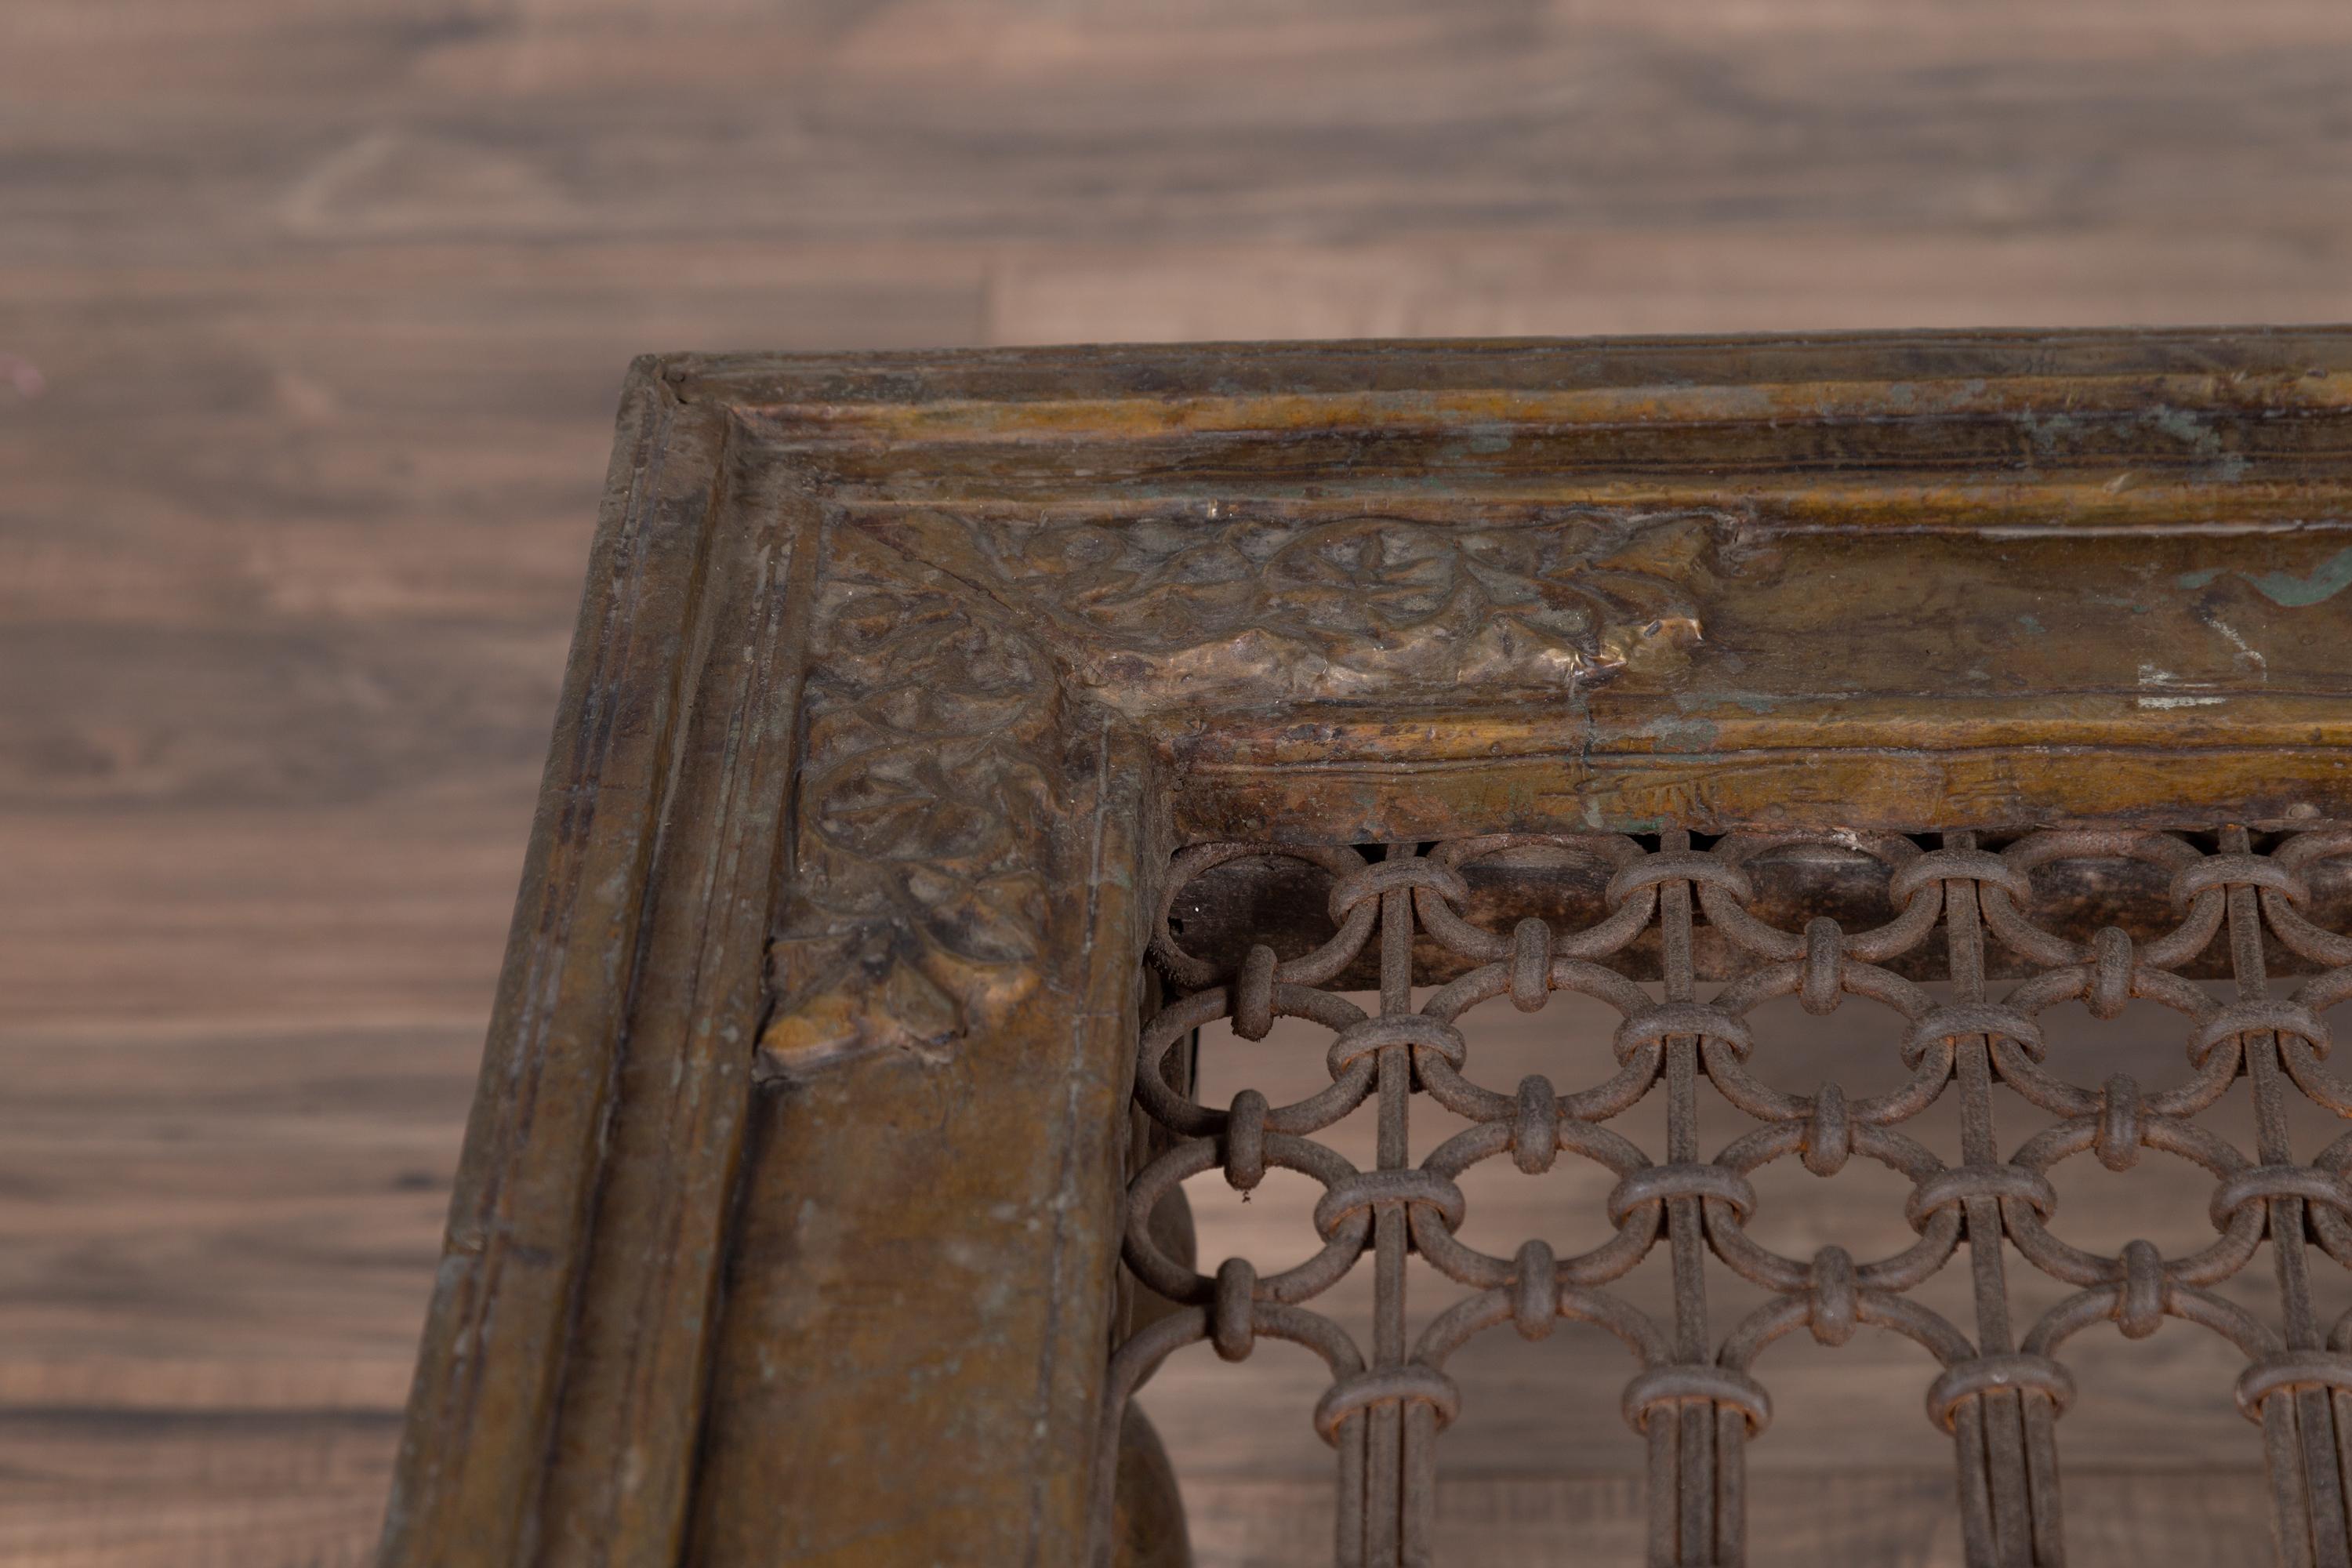 Antique Indian Brass Window Grate Coffee Table with Iron Geometric Design In Good Condition For Sale In Yonkers, NY